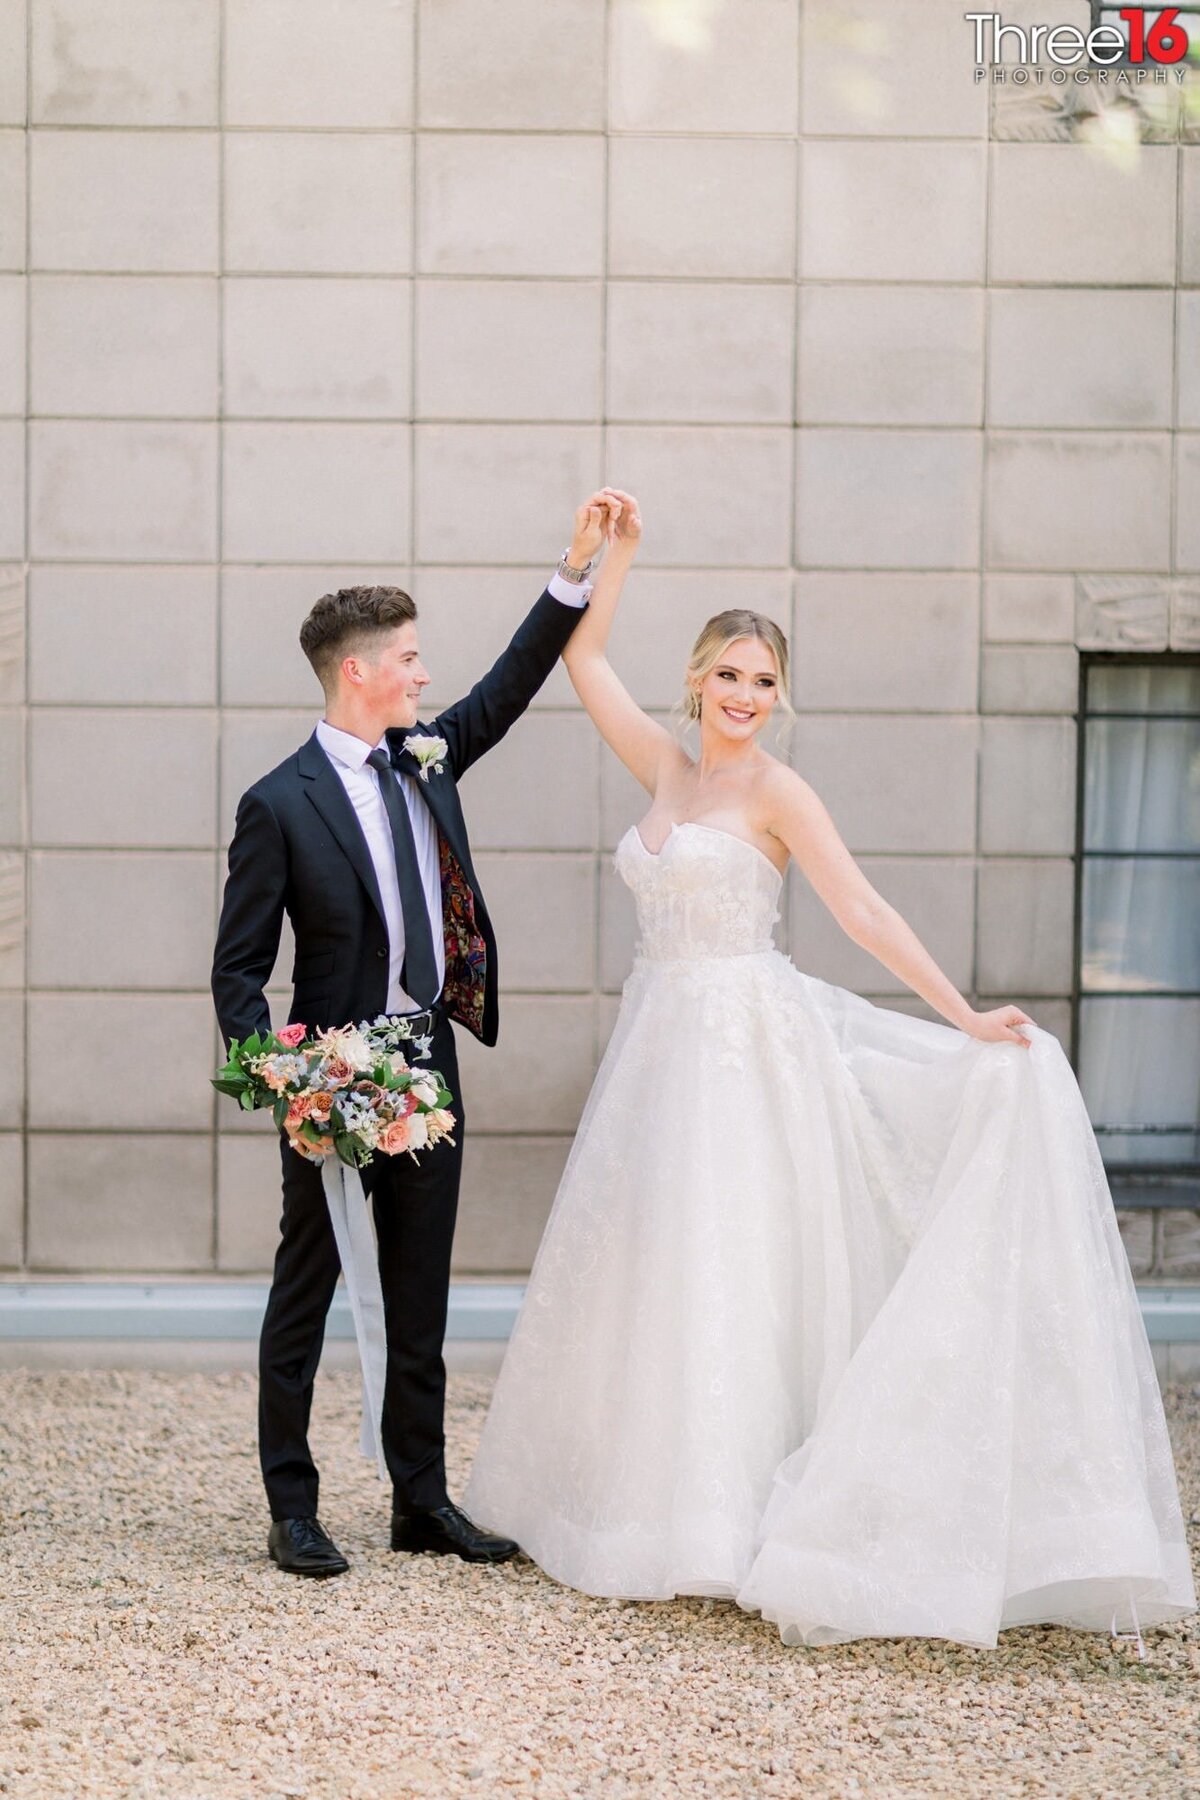 Groom holds his Bride's bouquet as he spins her while she holds up her dress train